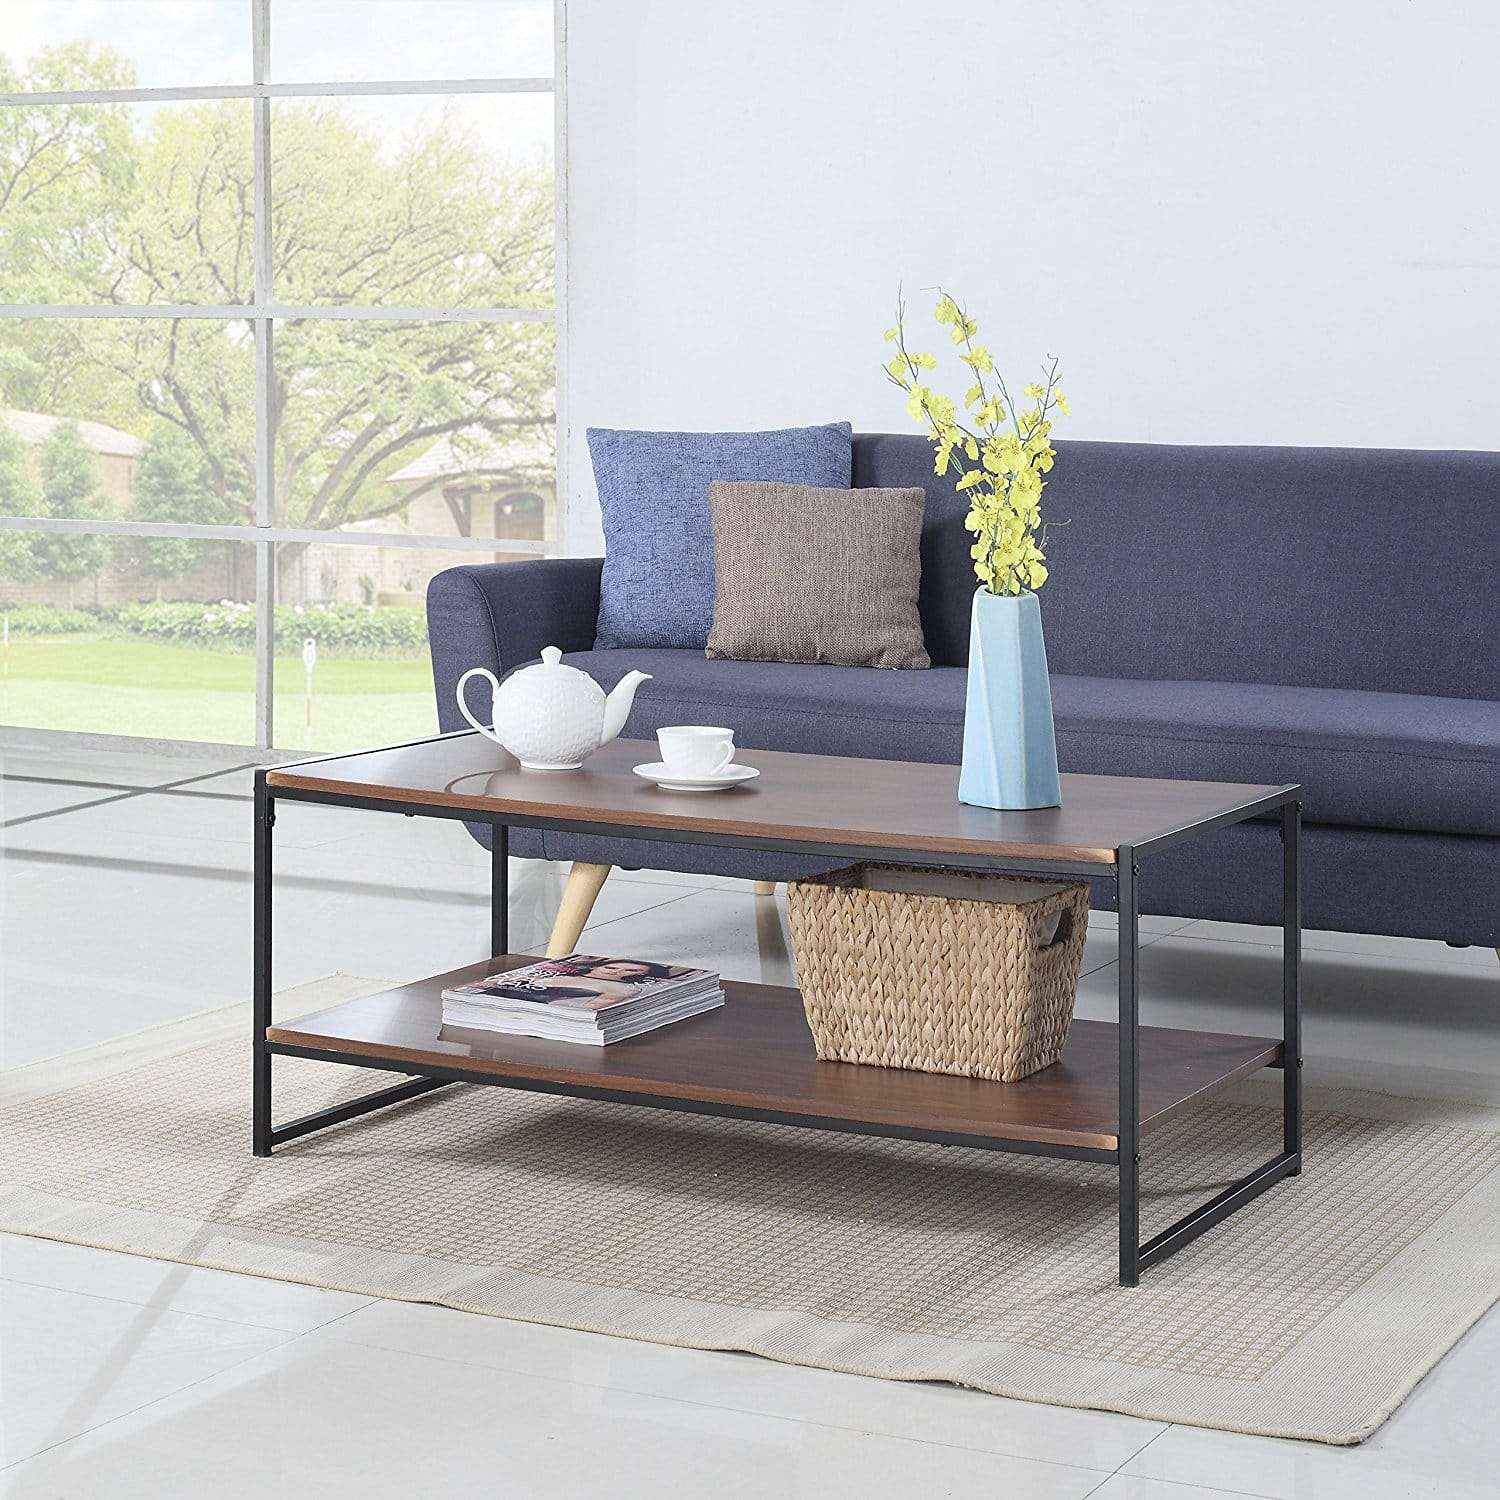 Cheap Coffee Tables: The Ultimate Guide to Coffee Tables Under $100